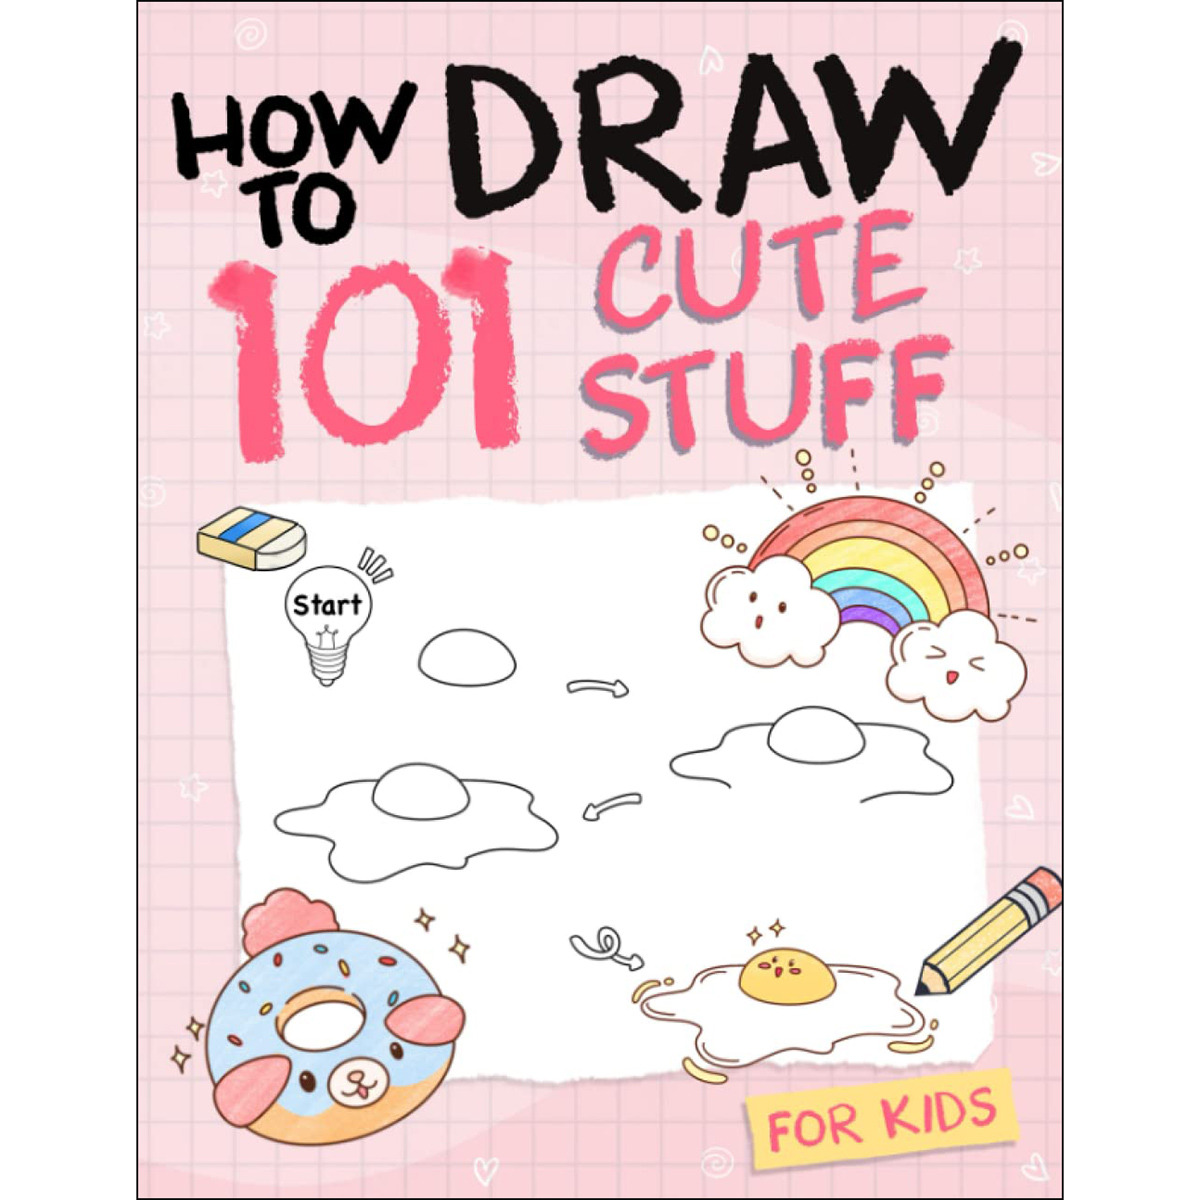 How To Draw 101 Cute Stuff For Kids: Simple and Easy Step-by-Step Guide Book to Draw Everything like Animals, Gift, Avocado and more with Cute Style